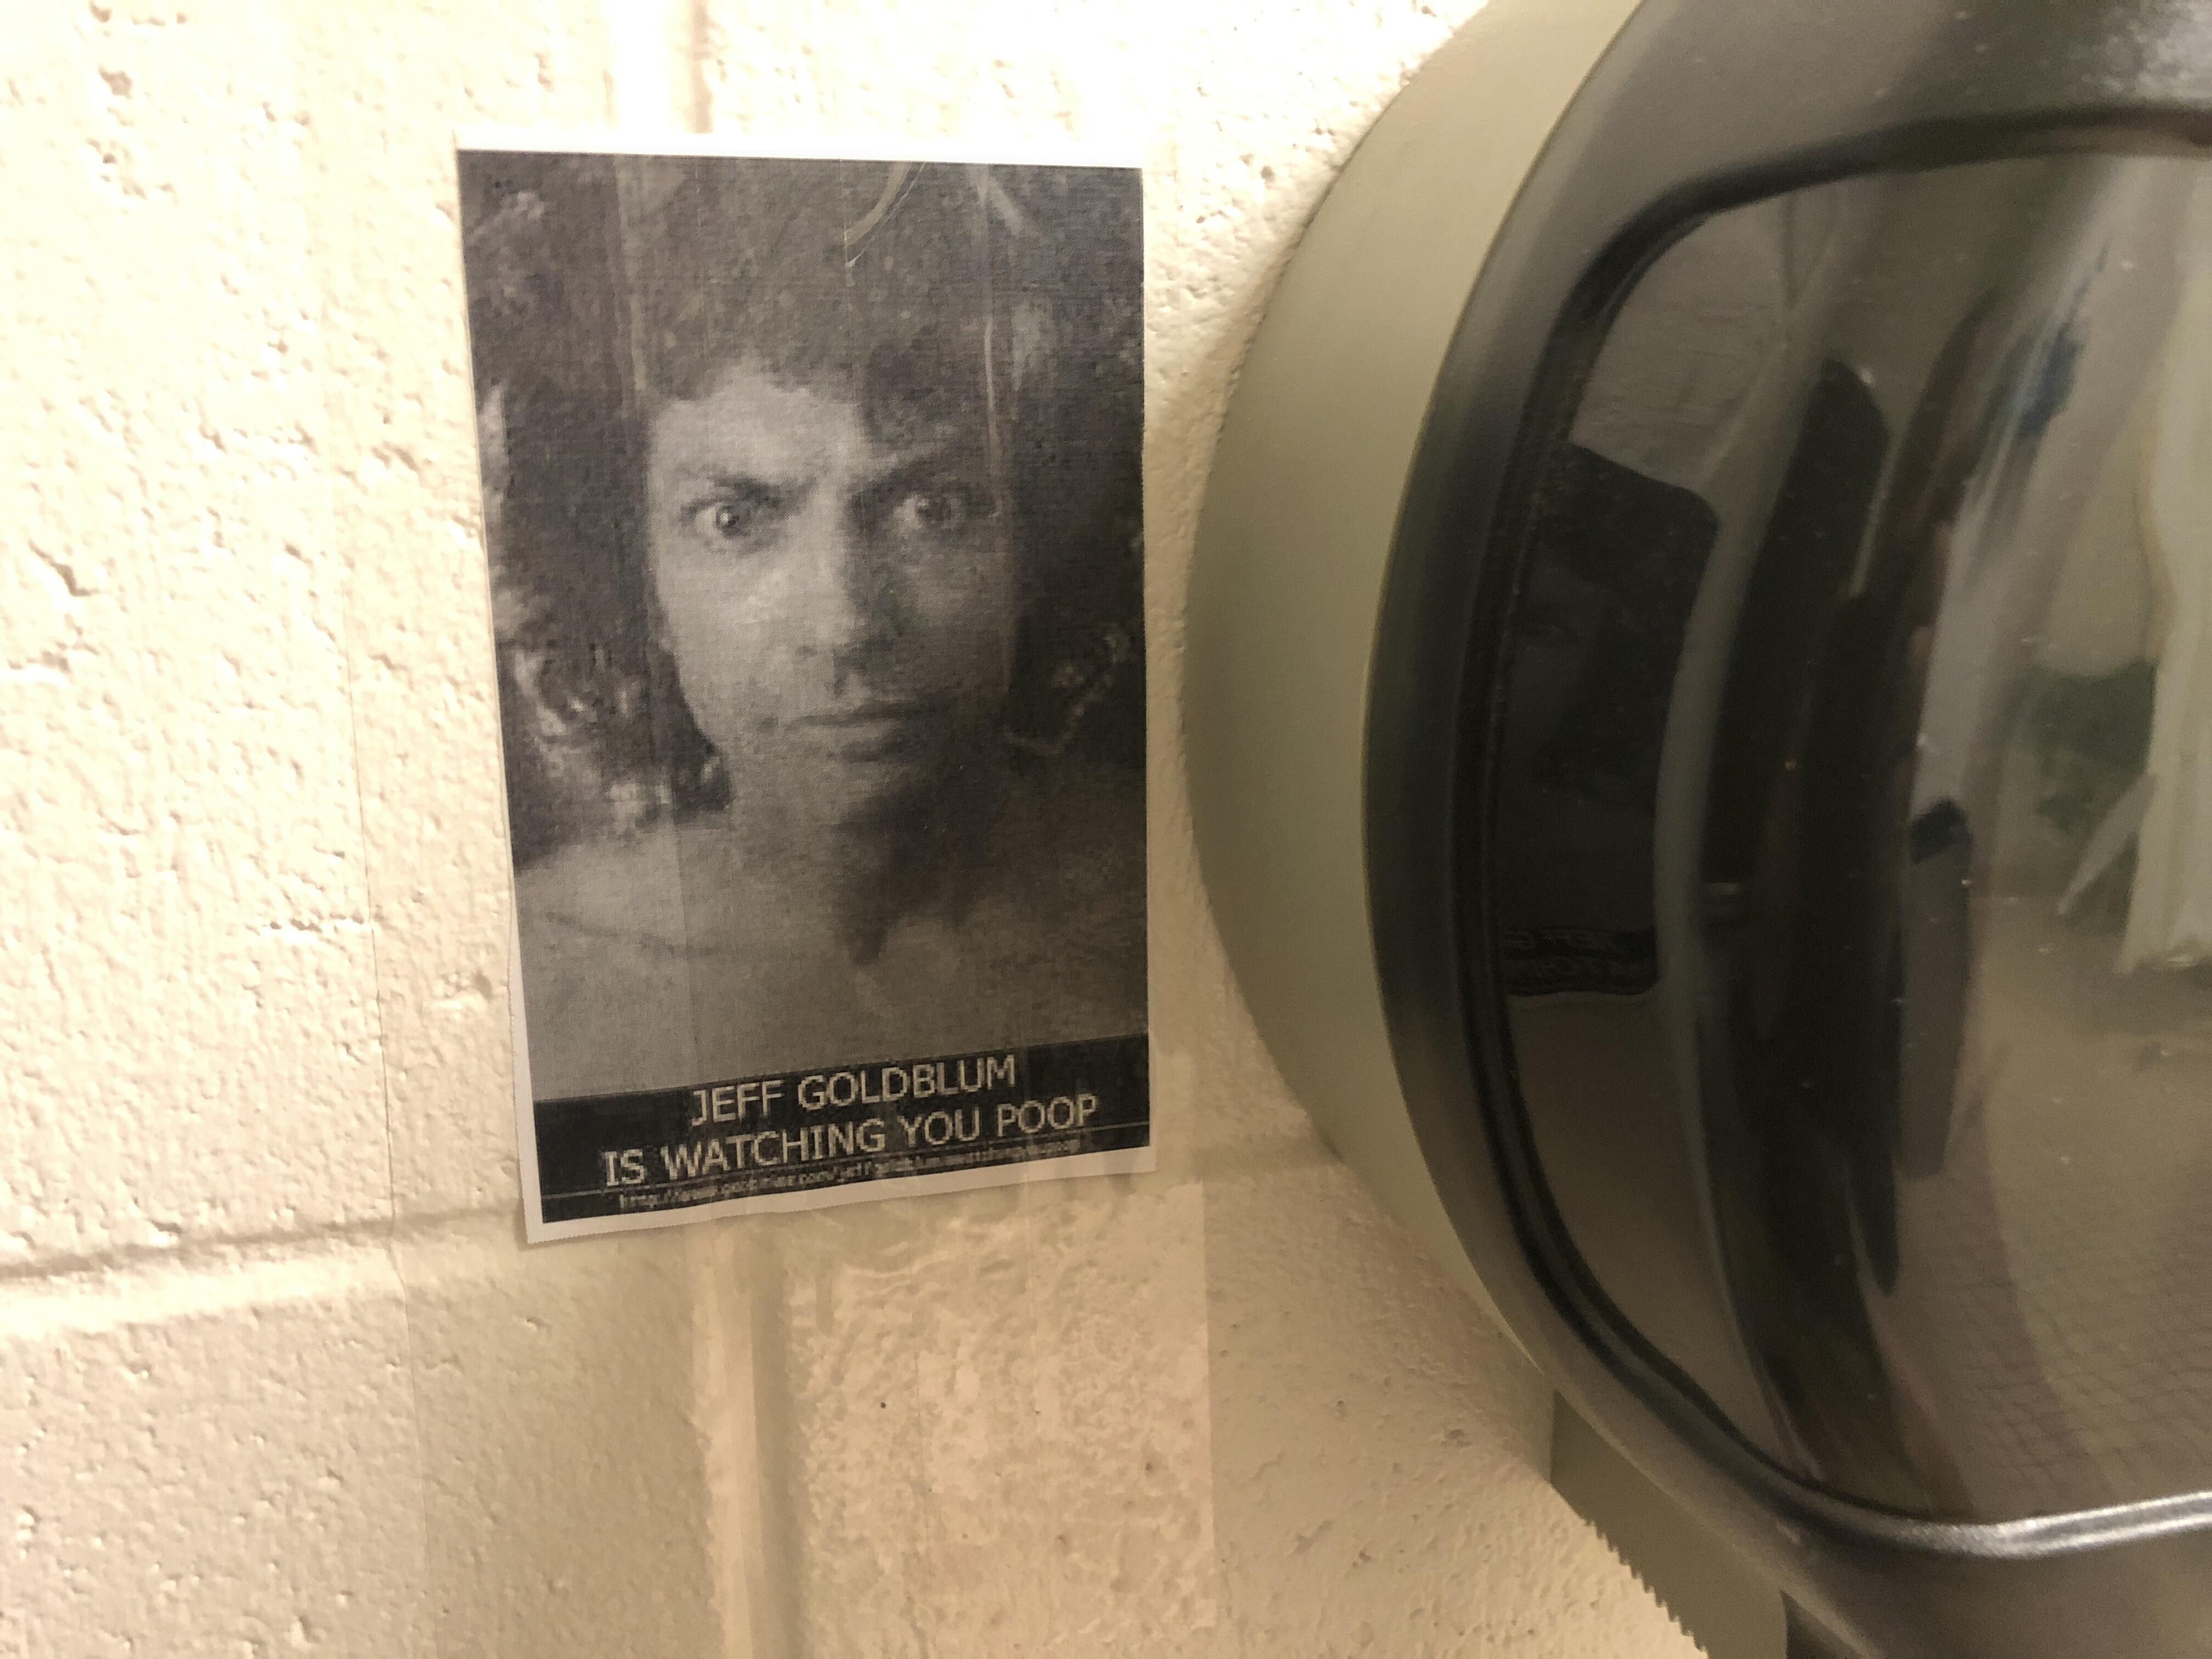 This picture hidden behind the toilet paper at a maintenance shop.